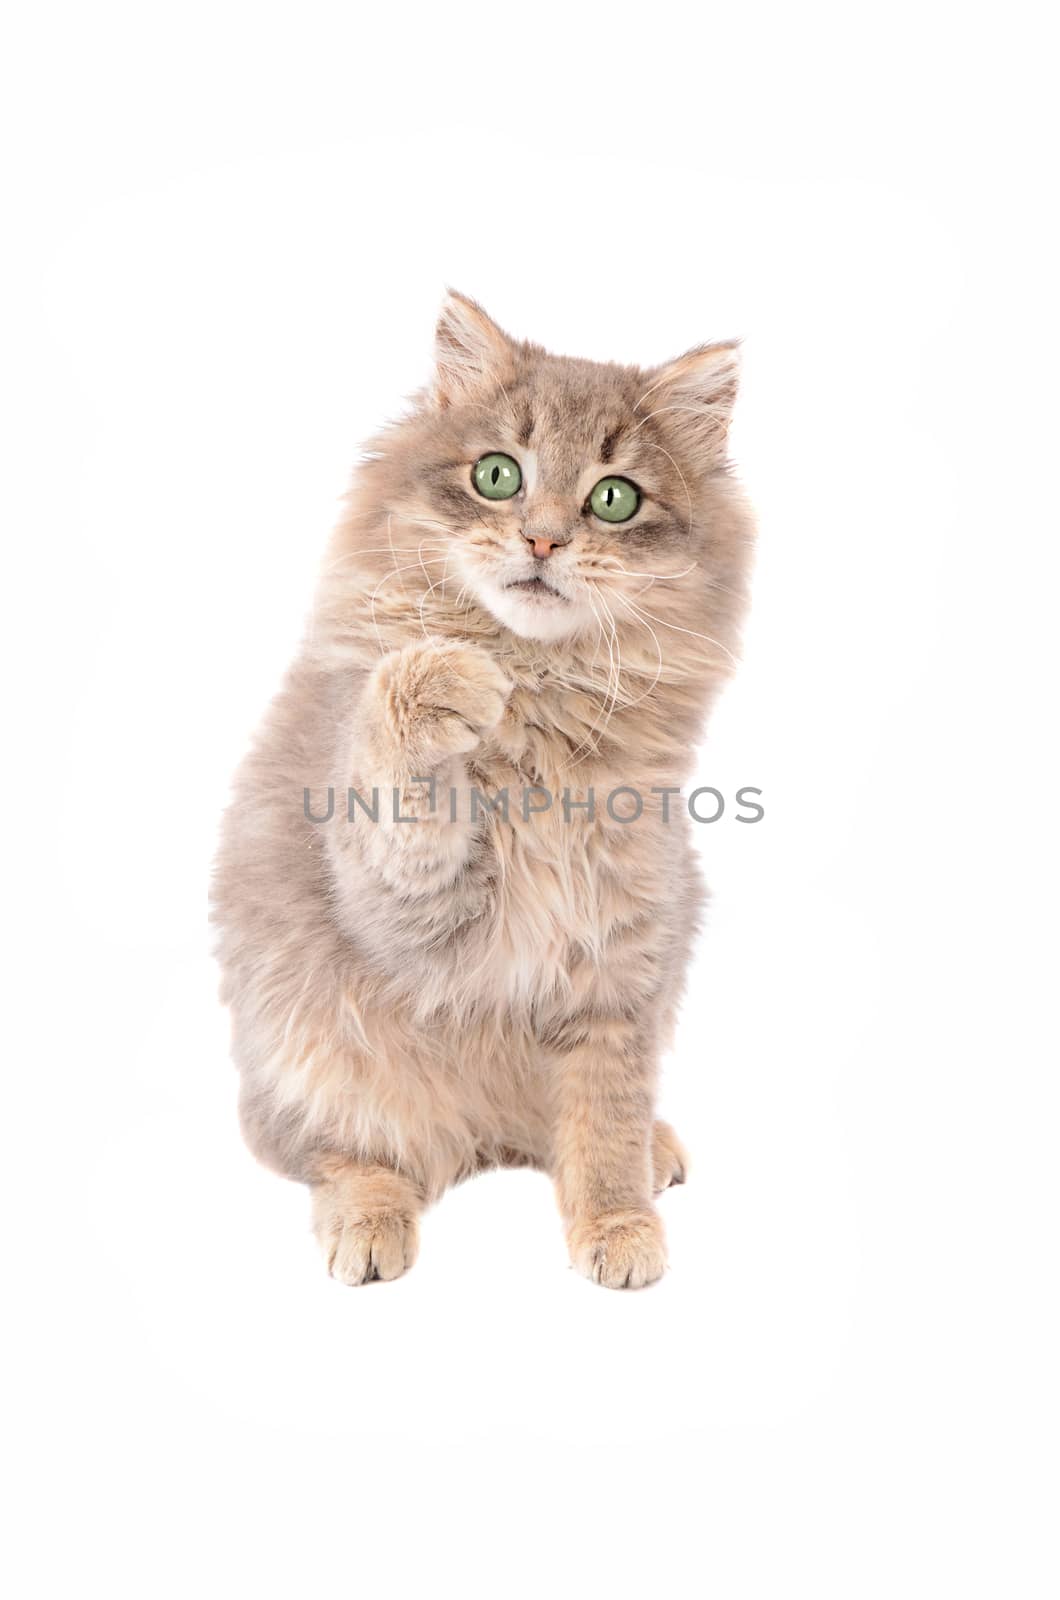 Adorable kitten on a white background with a raised paw